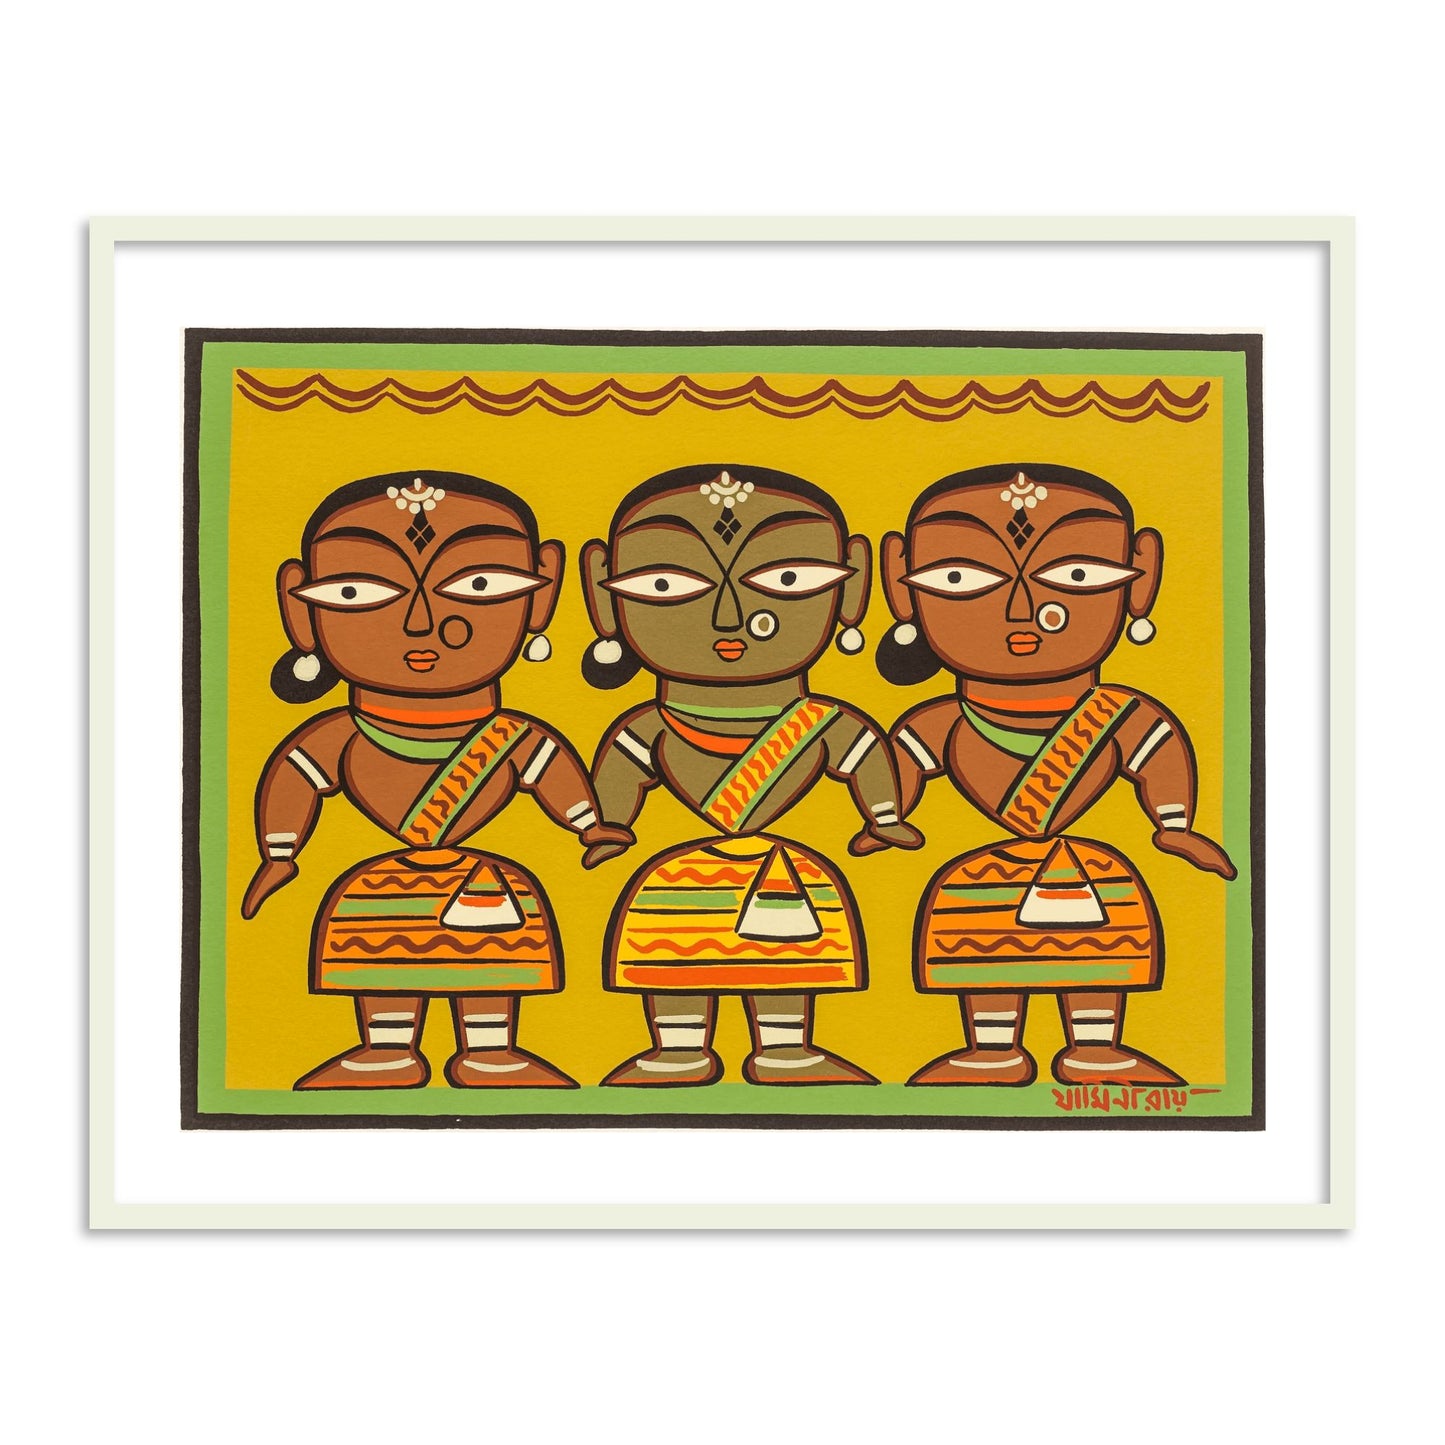 Female Dancers Wall Art Painting Print by Jamini Roy for Home Decor